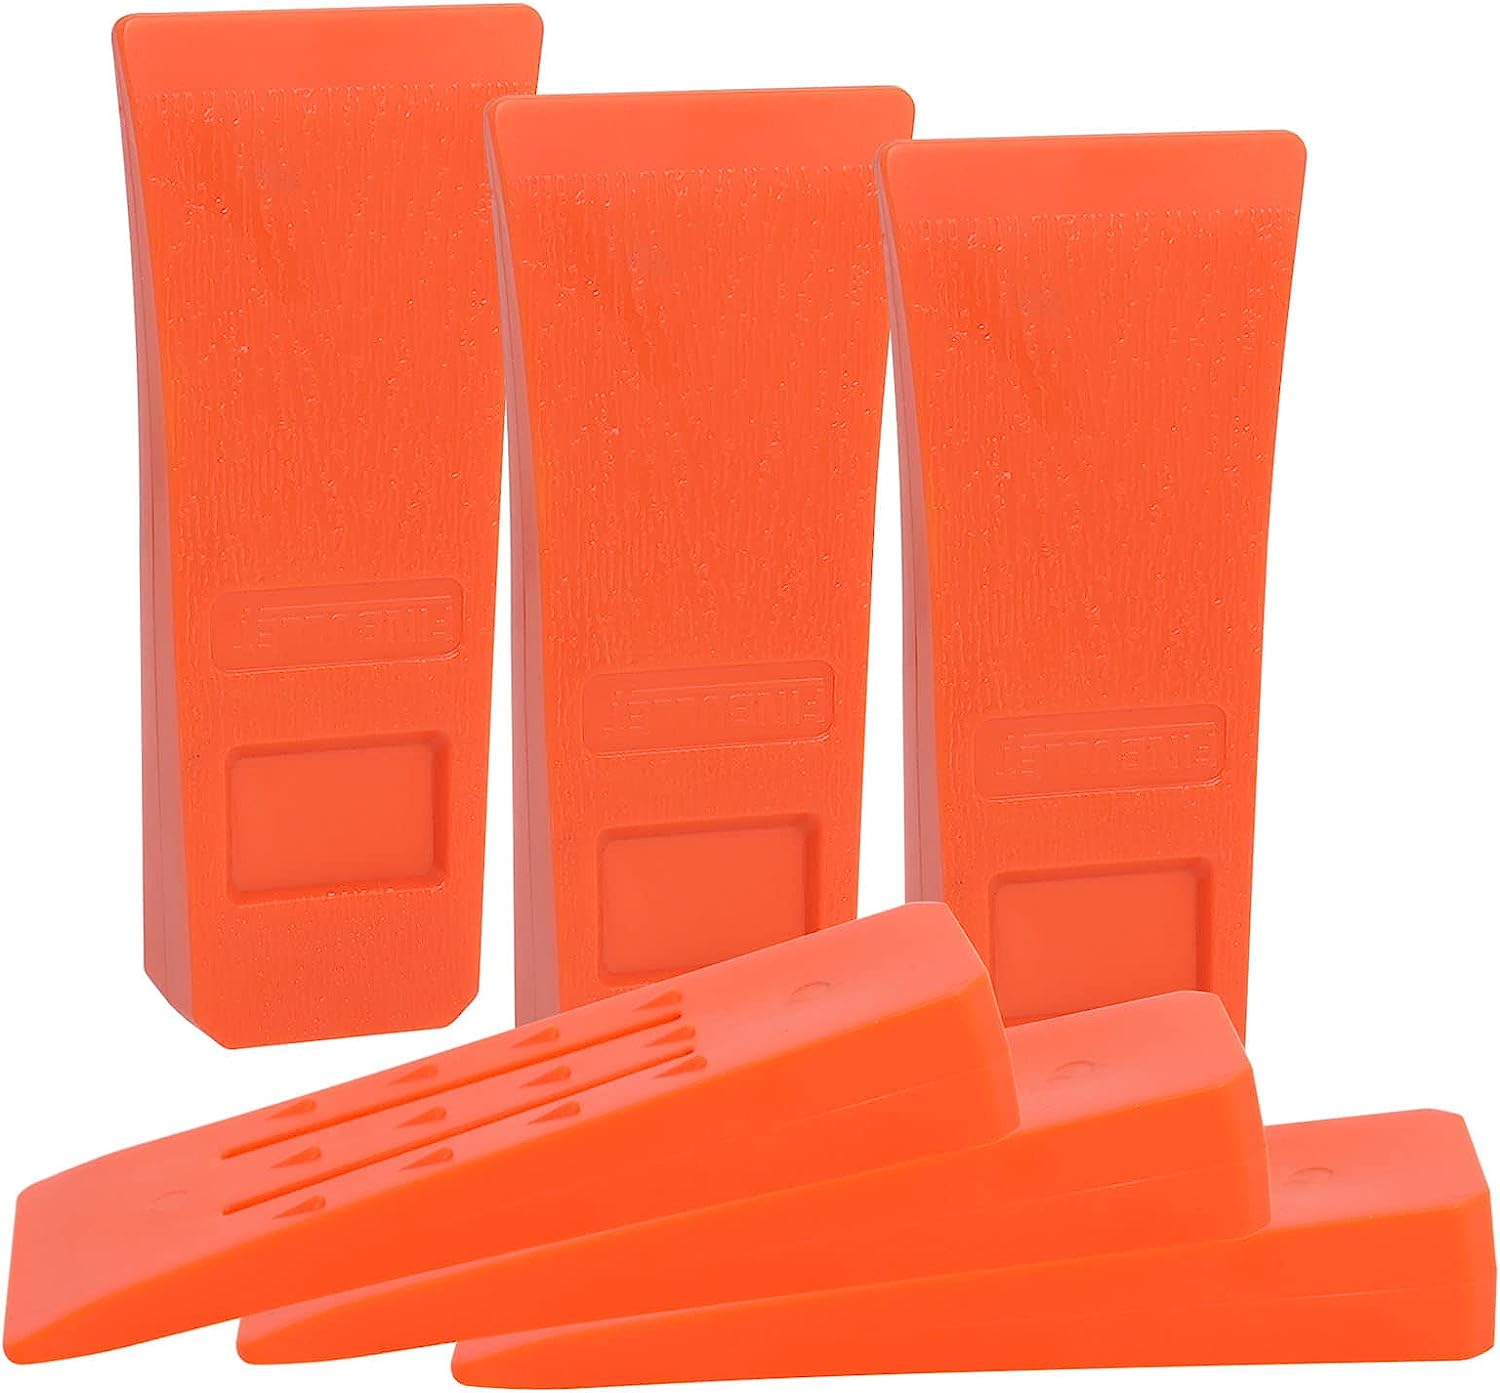 6'' Felling Wedges Set for Chainsaw - ABS Plastic Wood [...]